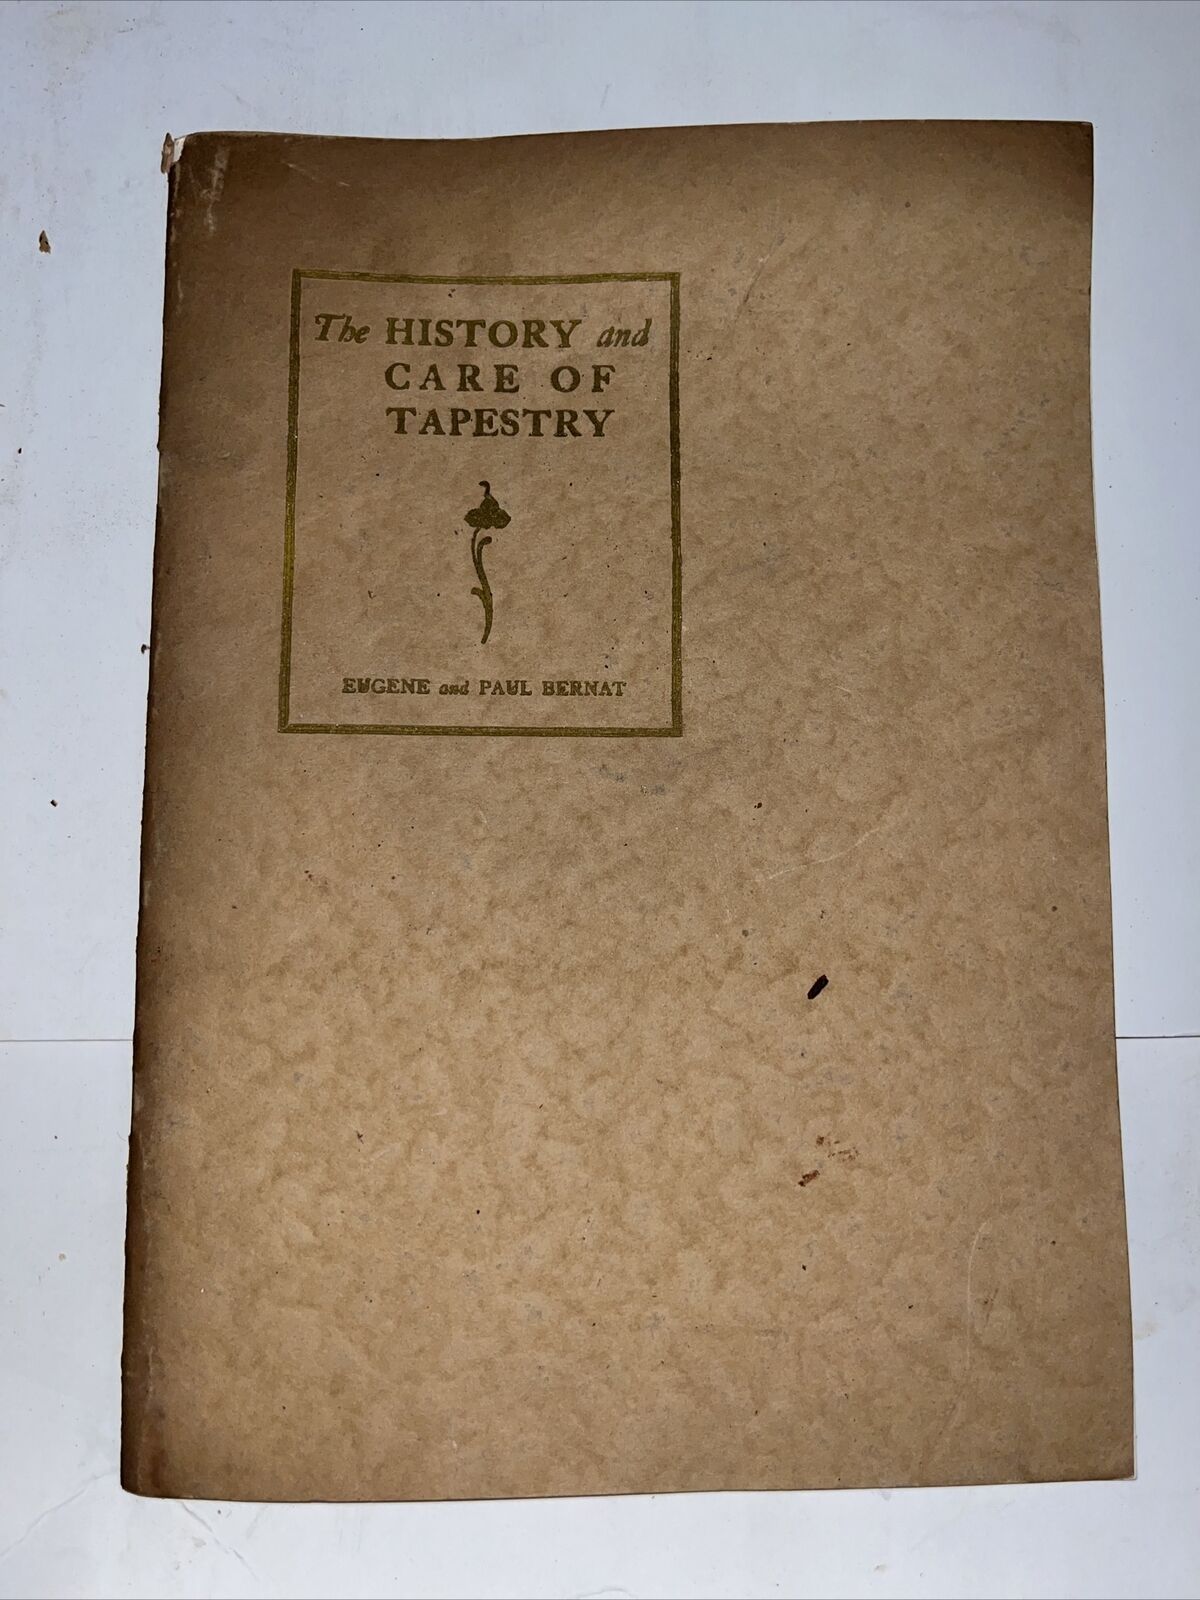 1919 Antique: The History and Care of Tapestry - Eugene & Paul Bernat Emile